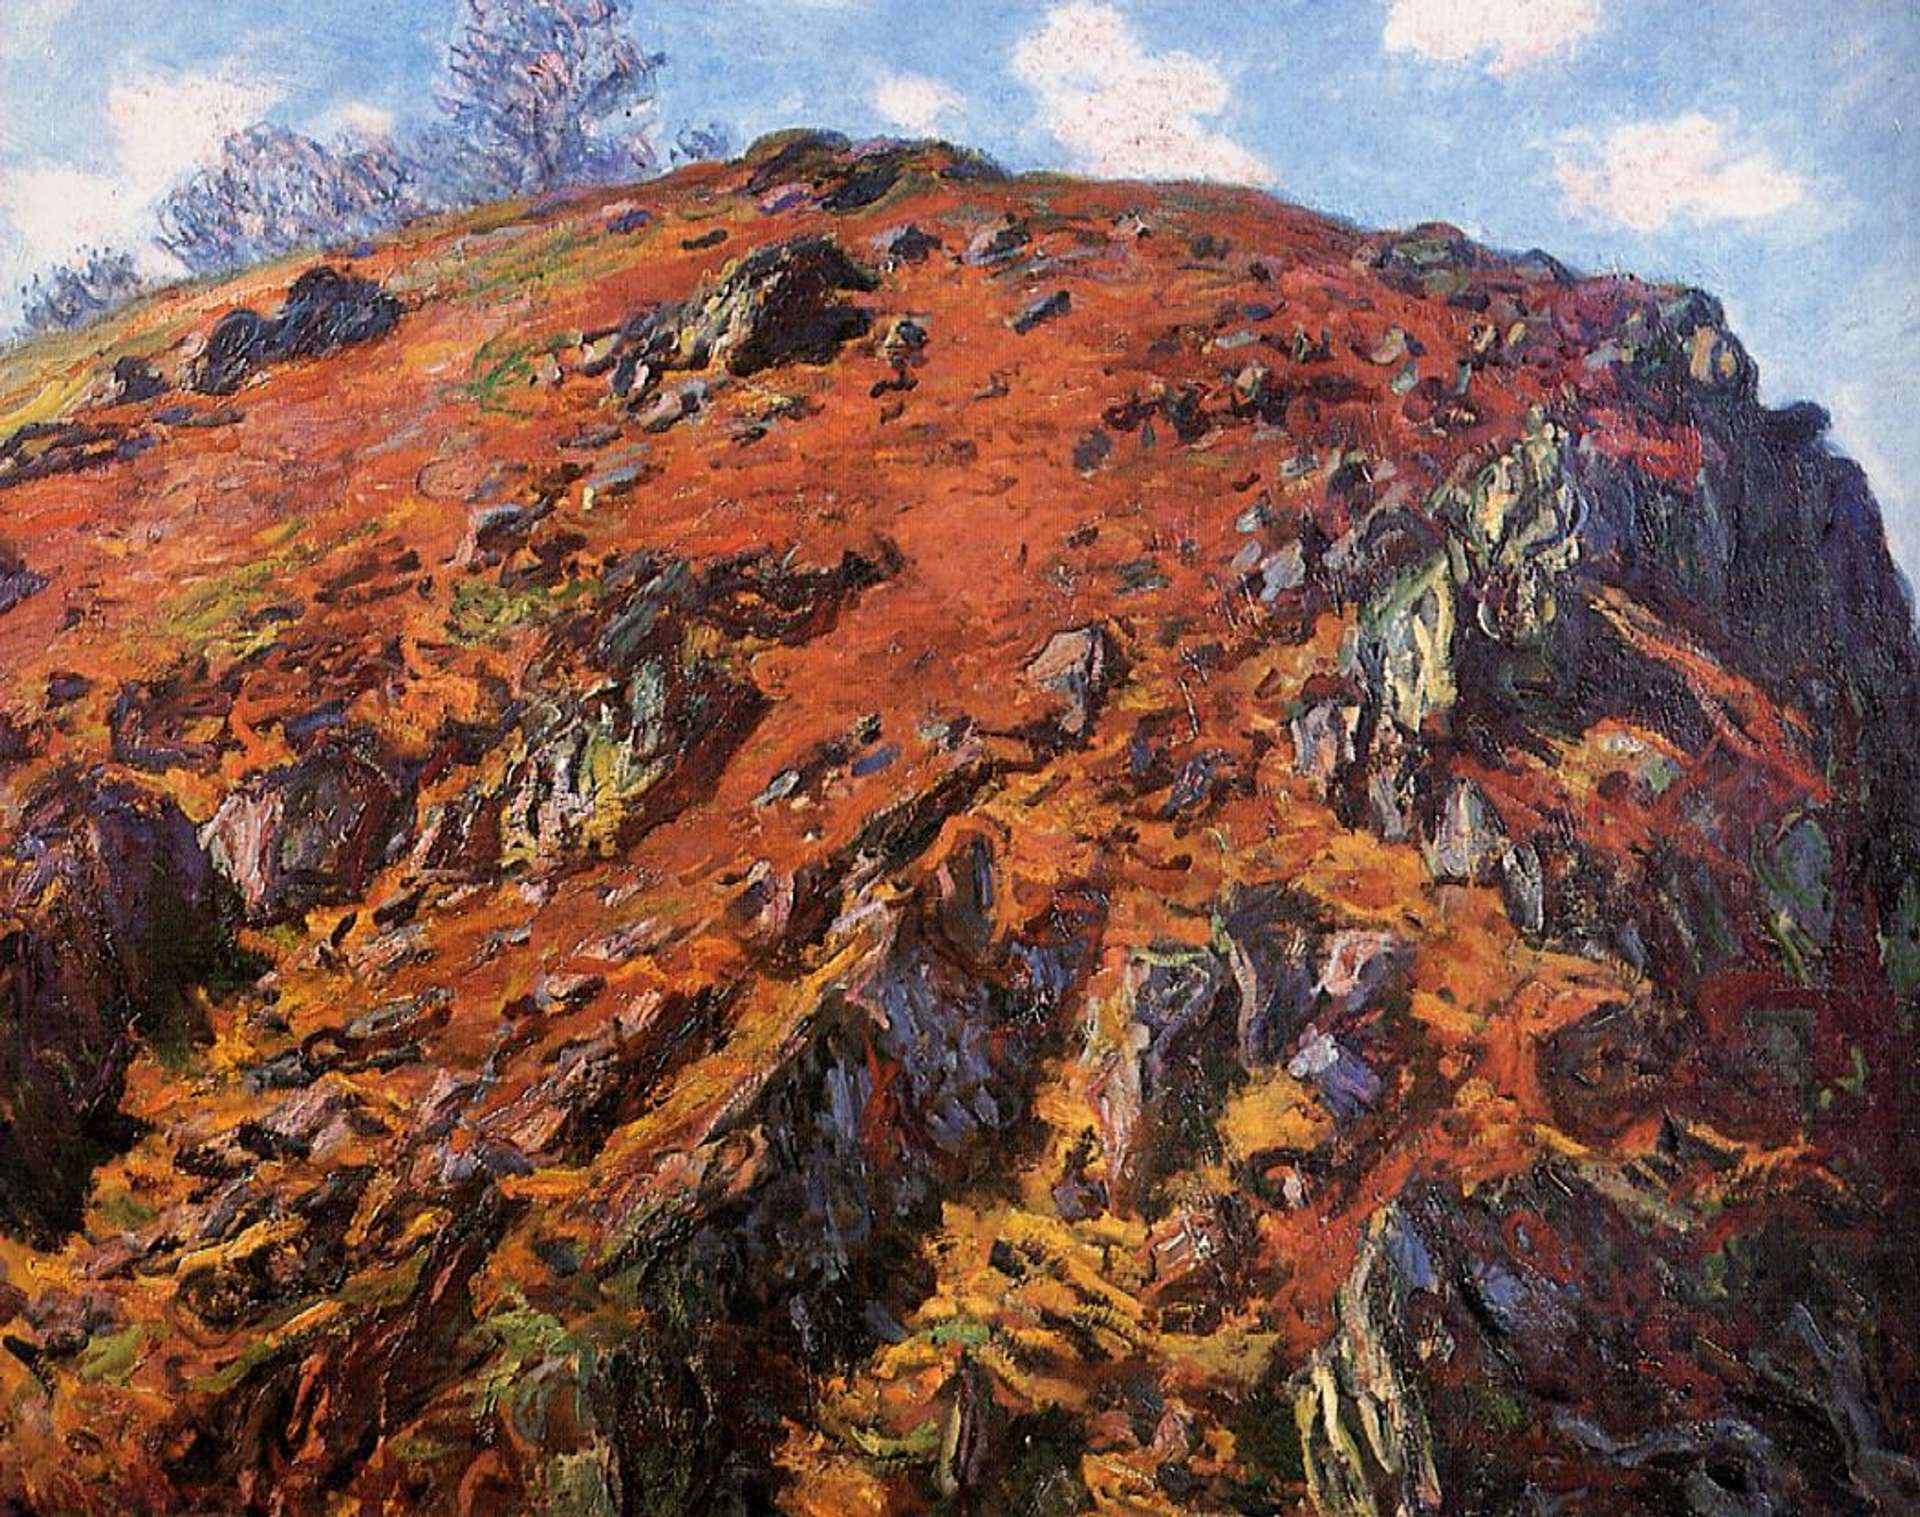 An image of the artwork Study of Rocks; Creuse: 'Le Bloc' by Claude Monet. It shows a large rock formation, highlighted in rich tones of orange, yellow and purple. It stands against a blue sky.